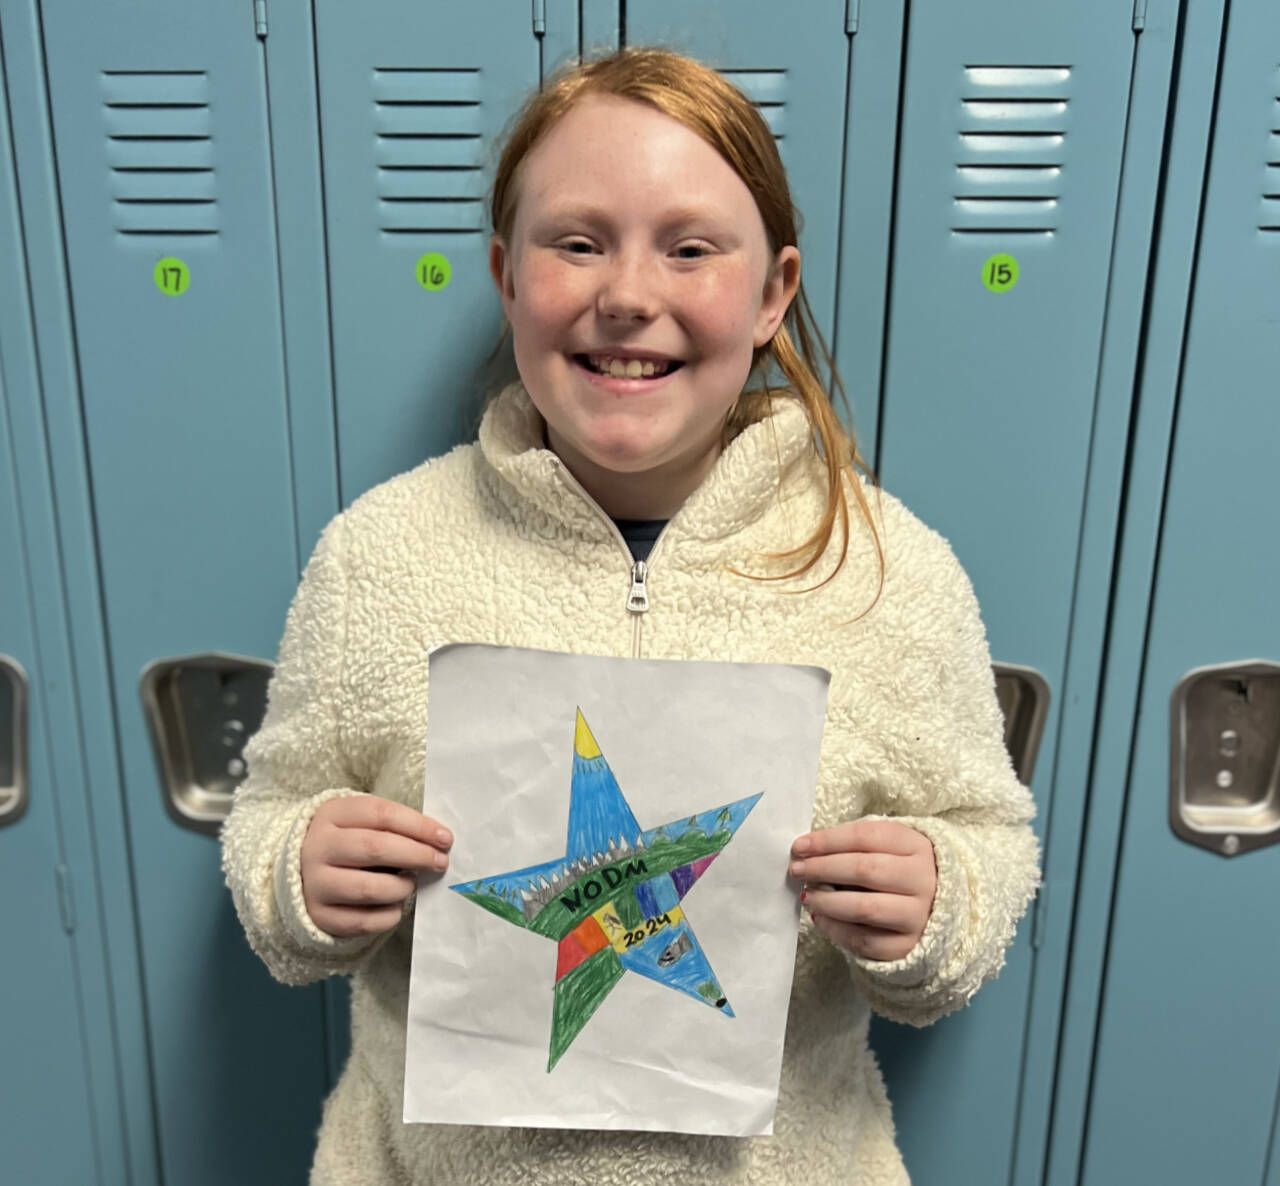 Photo/art courtesy of North Olympic Discovery Marathon
Dawn Munson, a student at Dry Creek Elementary School in Port Angeles, saw her artwork seleted for the 2024 North Olympic Discovery Kids Marathon medal.